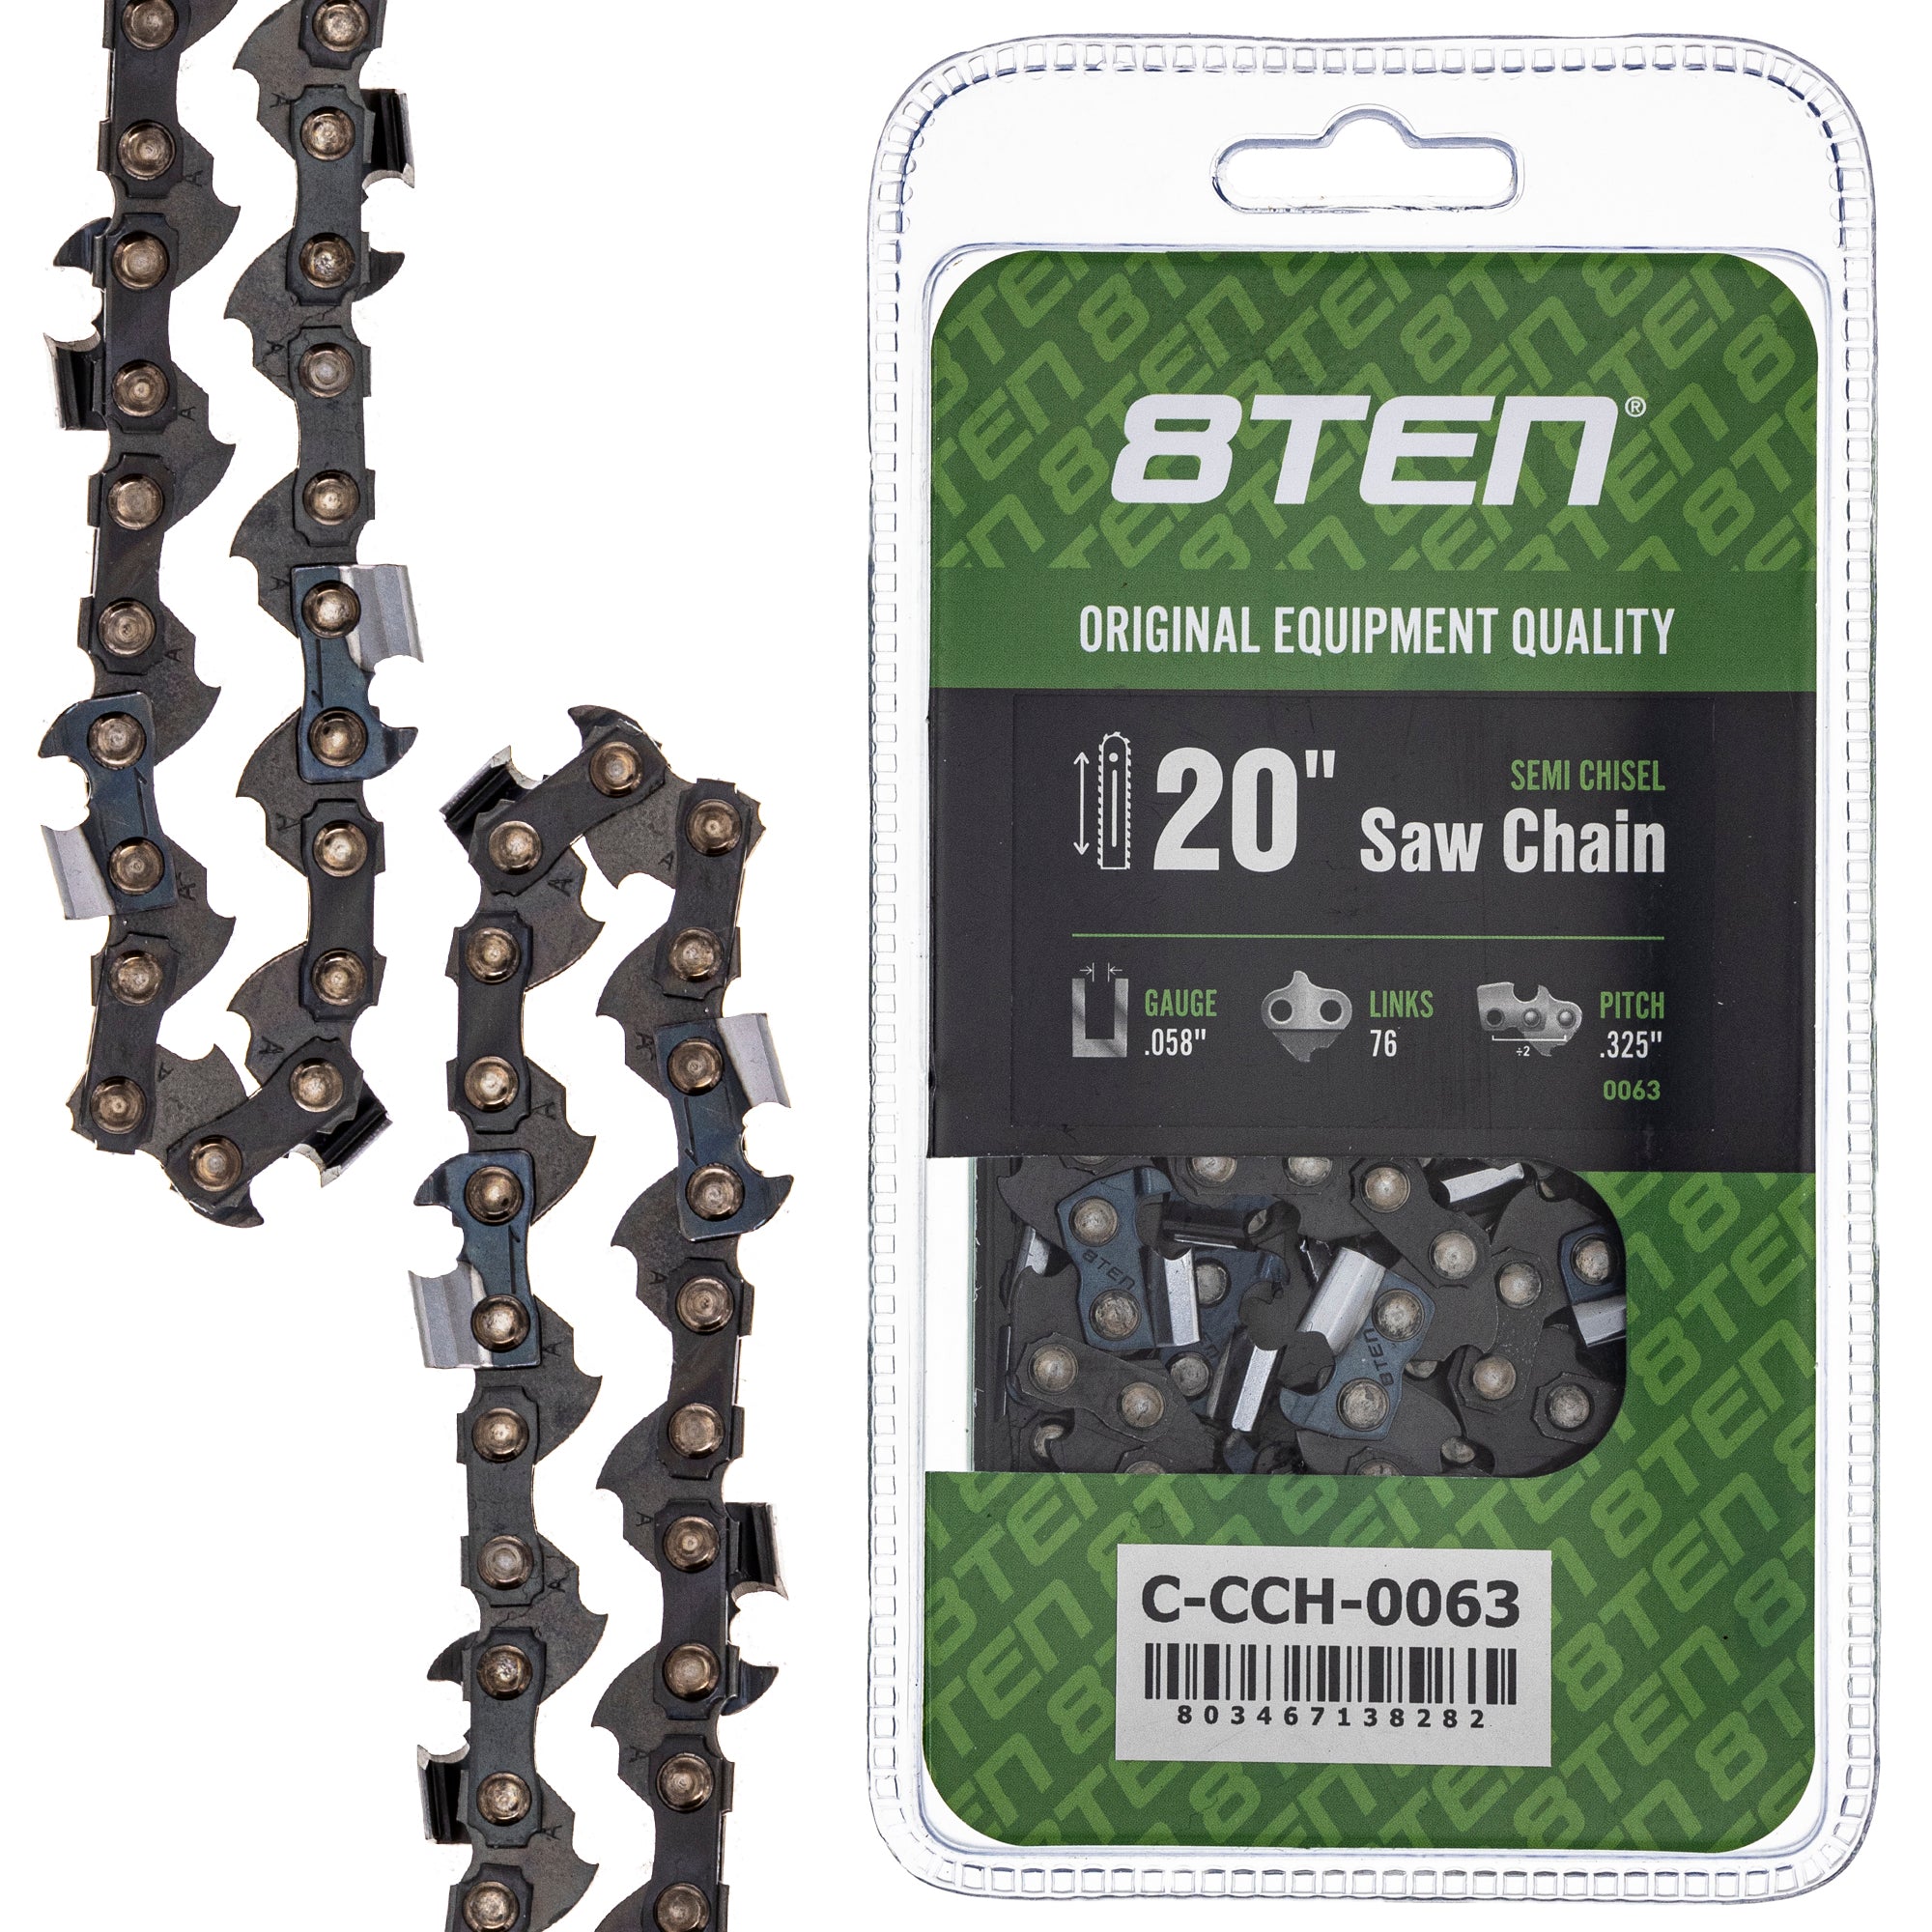 Chainsaw Chain 20 Inch .058 .325 76DL for zOTHER Max 20 8TEN 810-CCC2285H